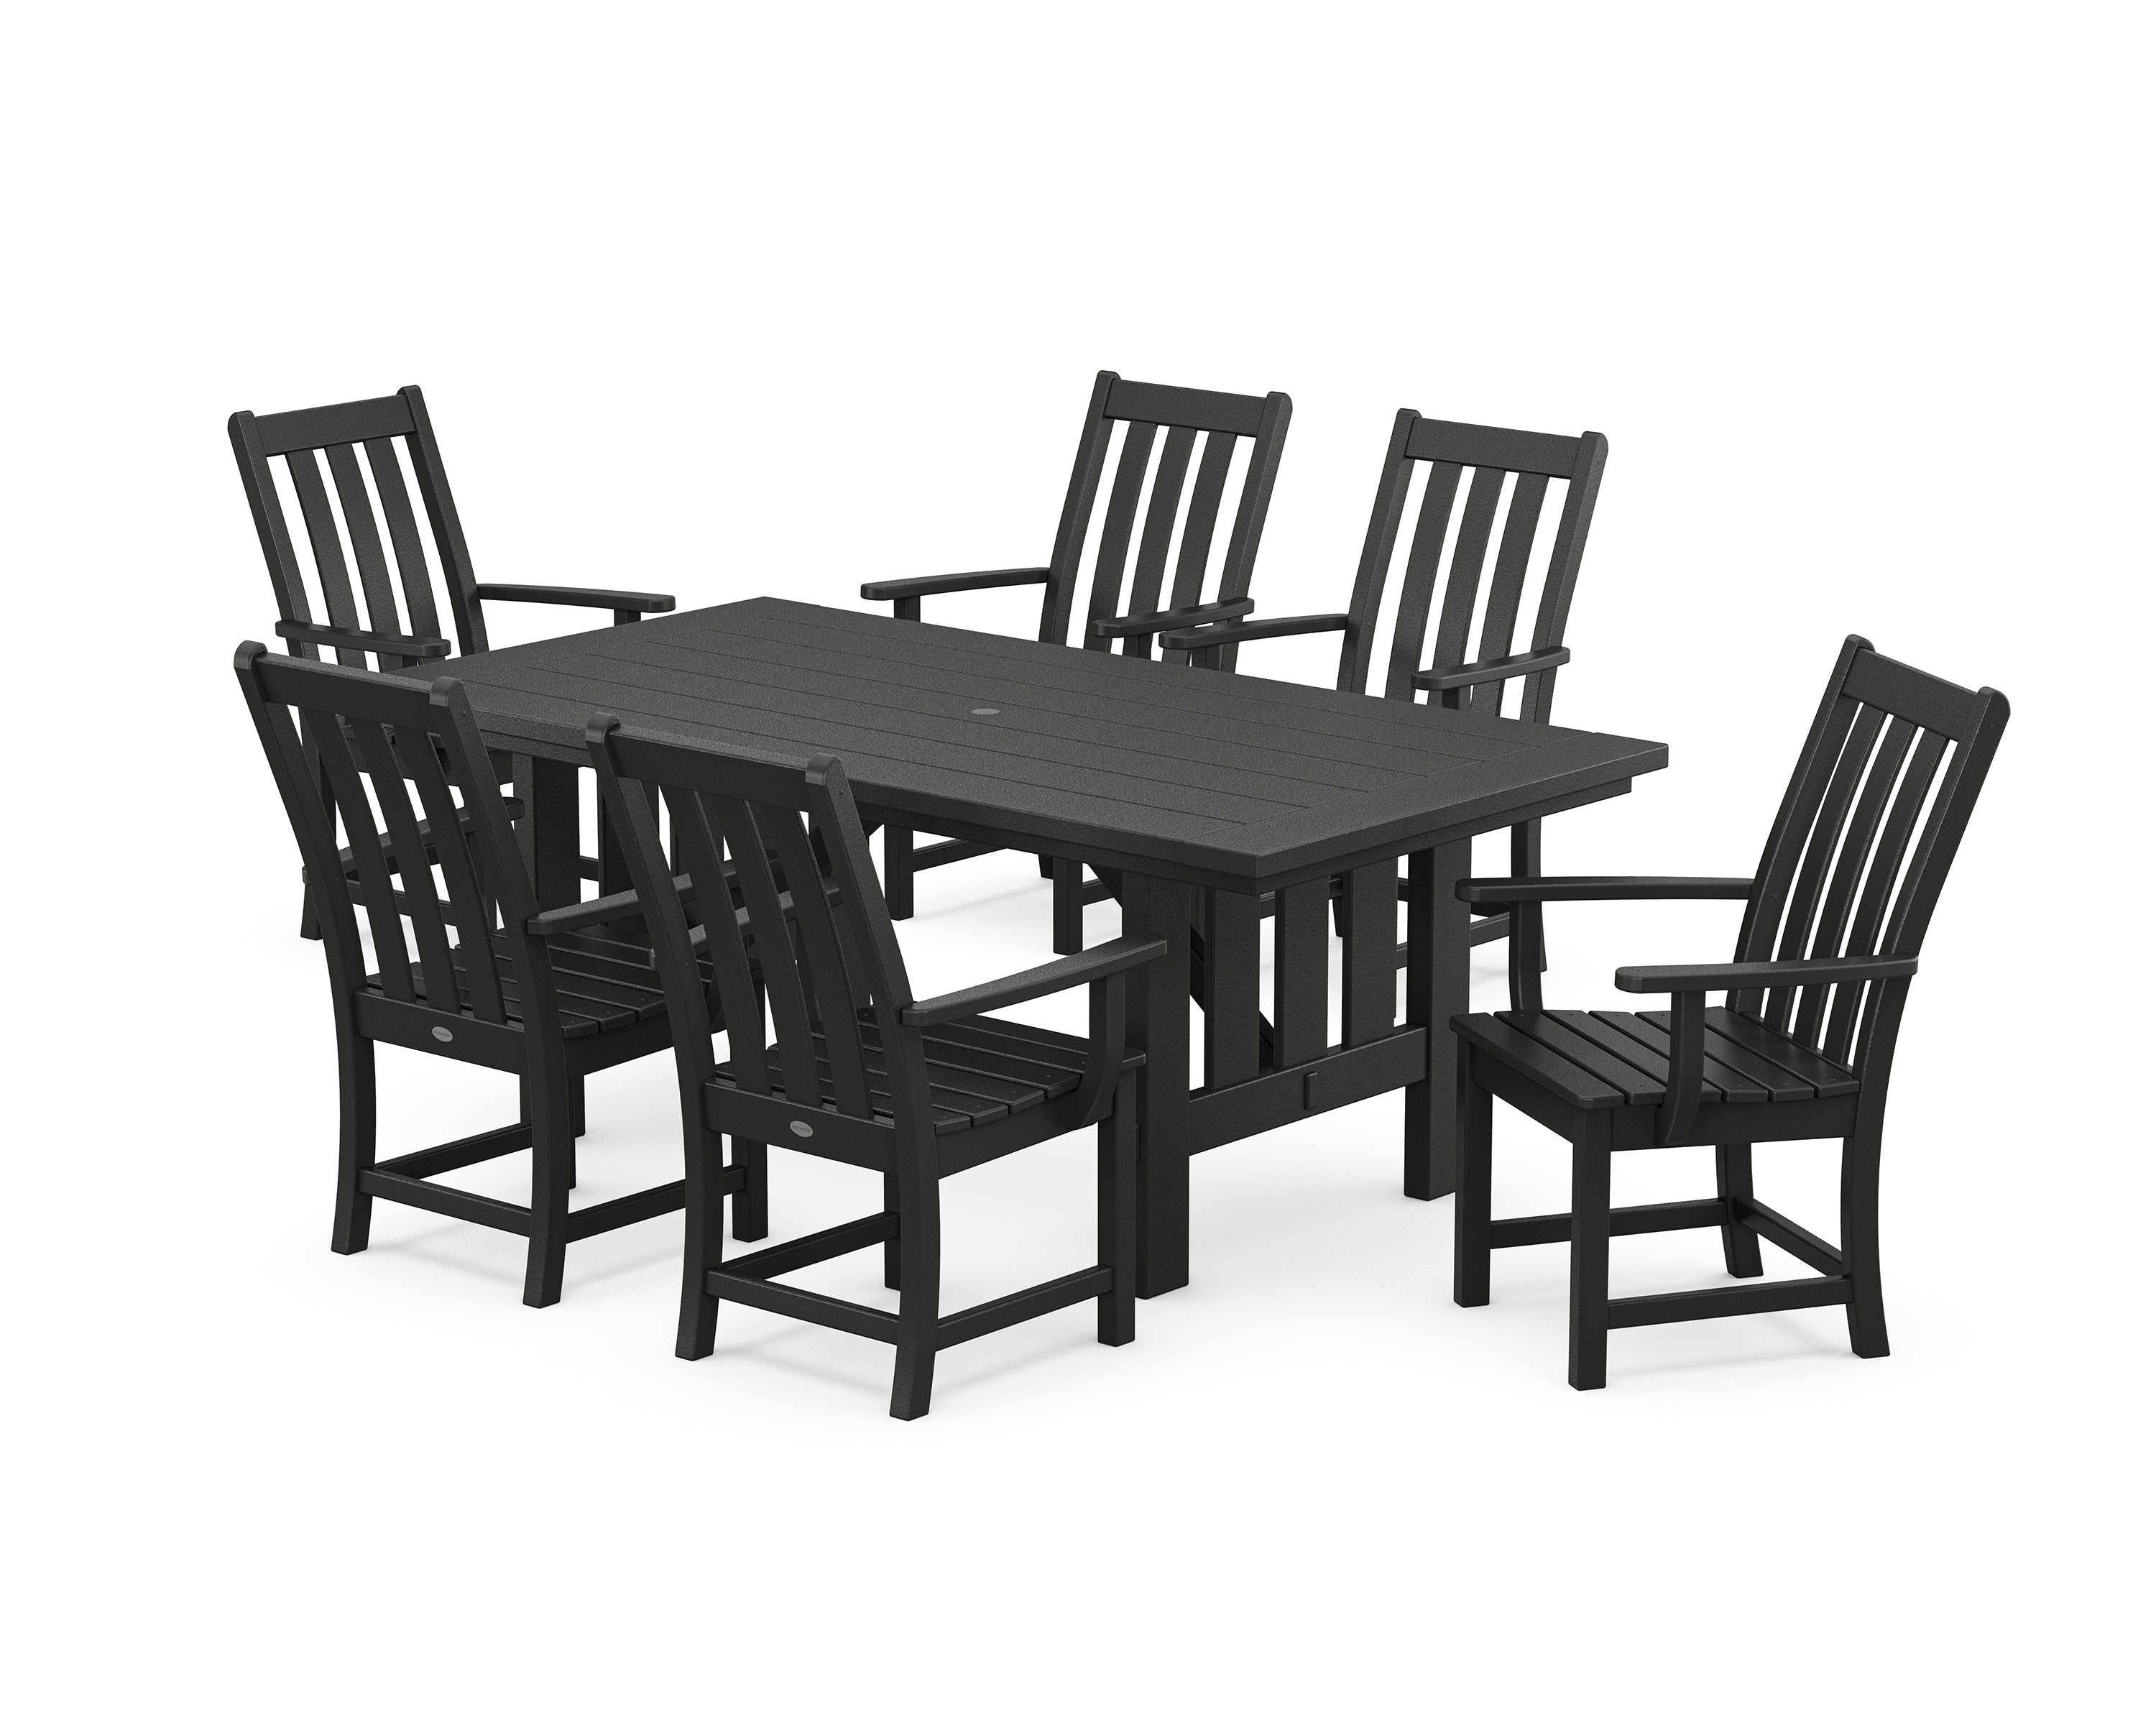 POLYWOOD® Vineyard Arm Chair 7-Piece Mission Dining Set in Black